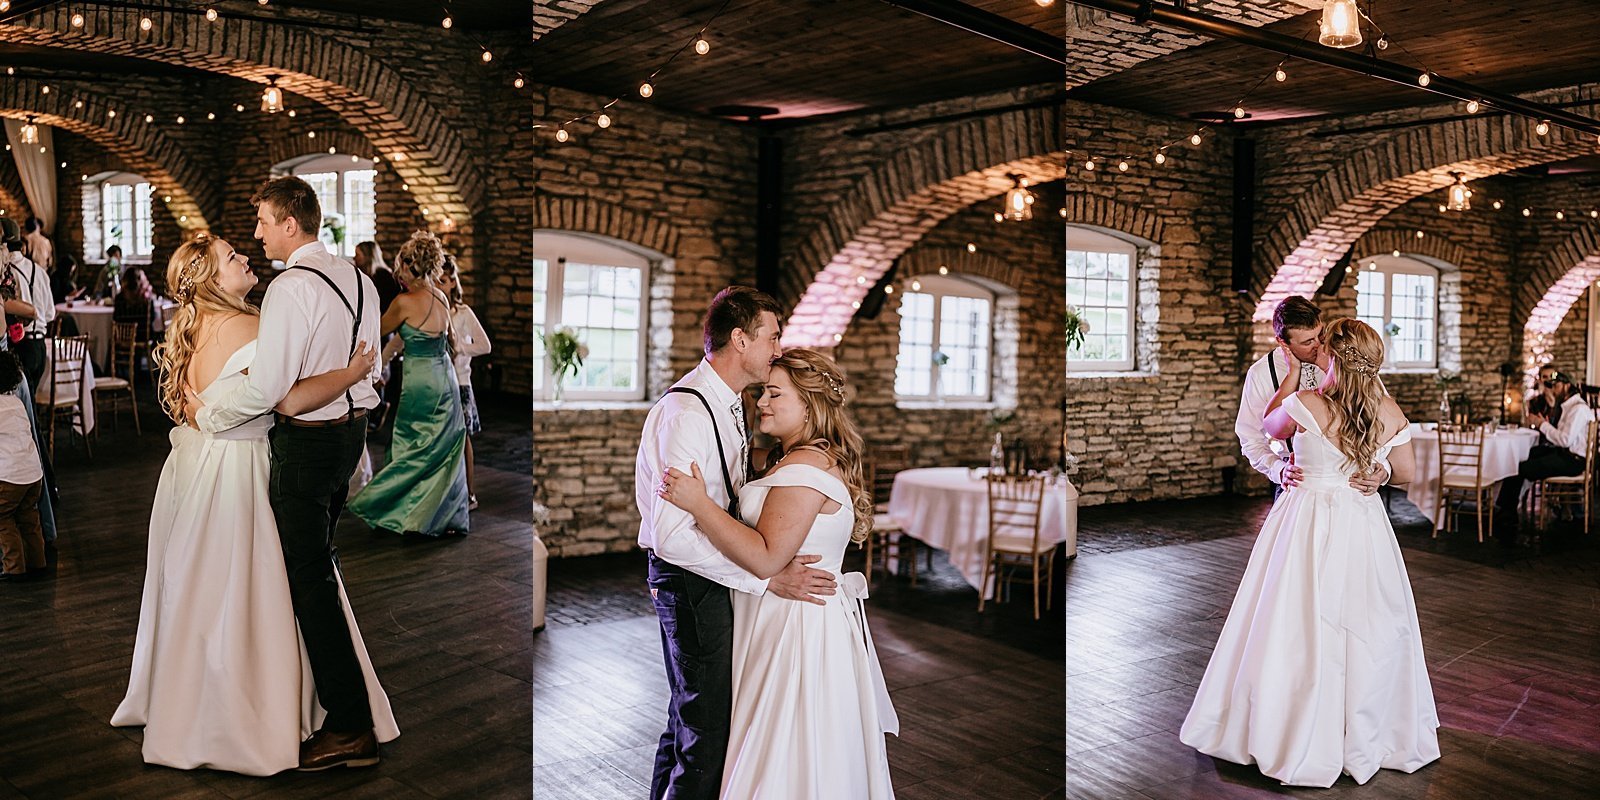  Newlyweds share their first dance at their rustic barn reception in Minneapolis 